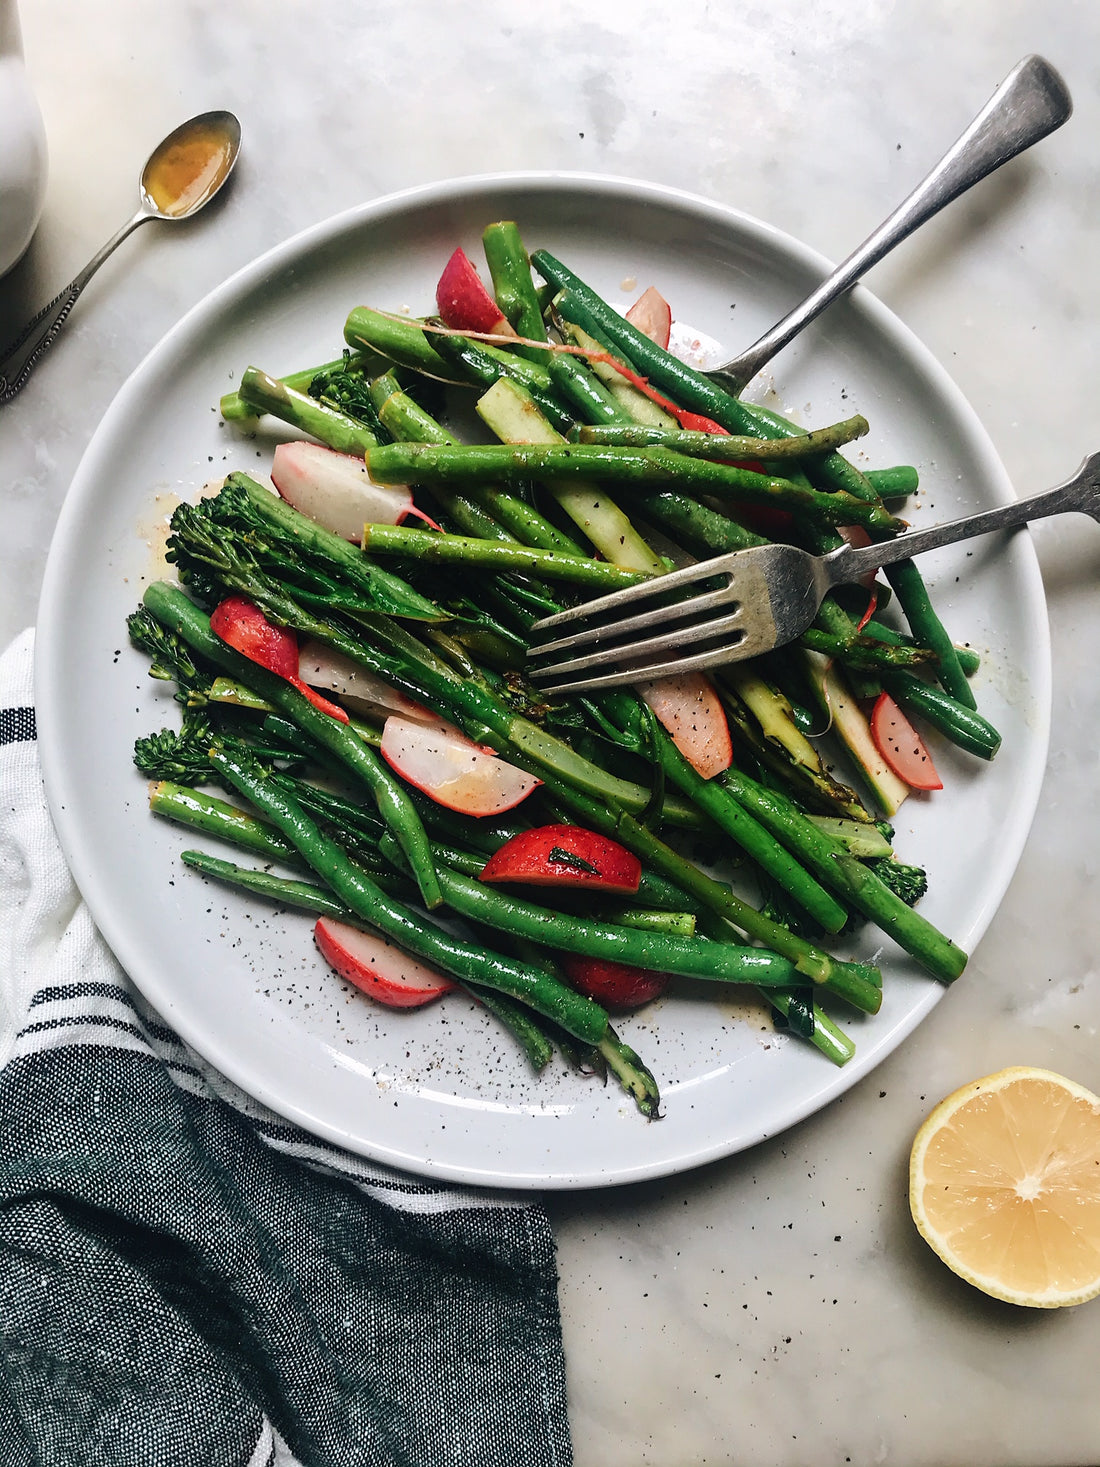 Lemony Brown Butter with Greens and Radishes